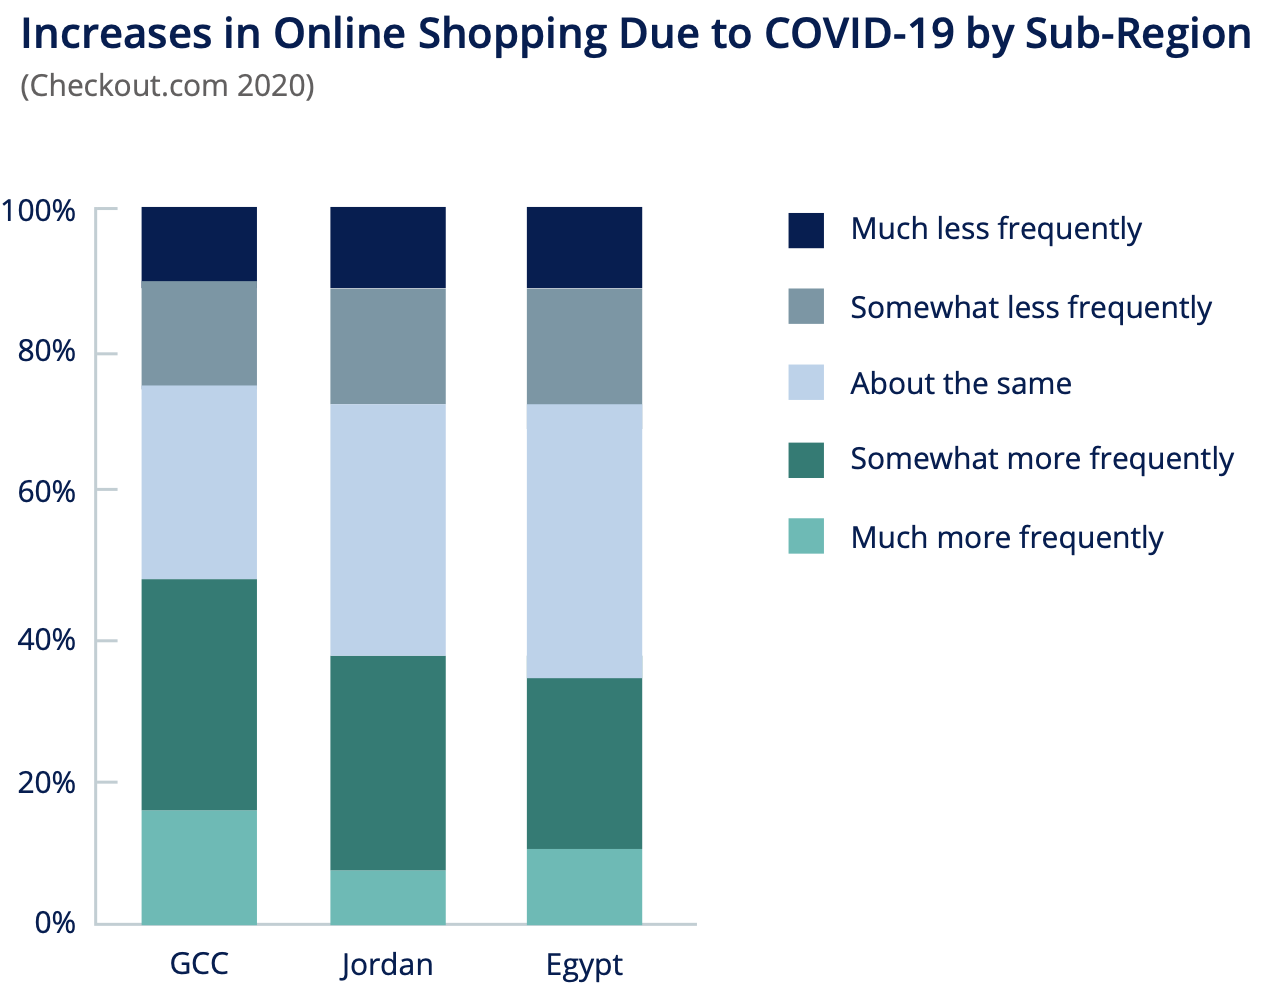 The online presence of the young population. Alongside the Internet penetration, 80% of youth in the MENA region shop online frequently according to MIT, while half of the consumers aged 18 - 24 buy more online because of COVID. According to a Checkout.com report, 47% of consumers in the GCC region are expected to shop online more frequently in 2021.   